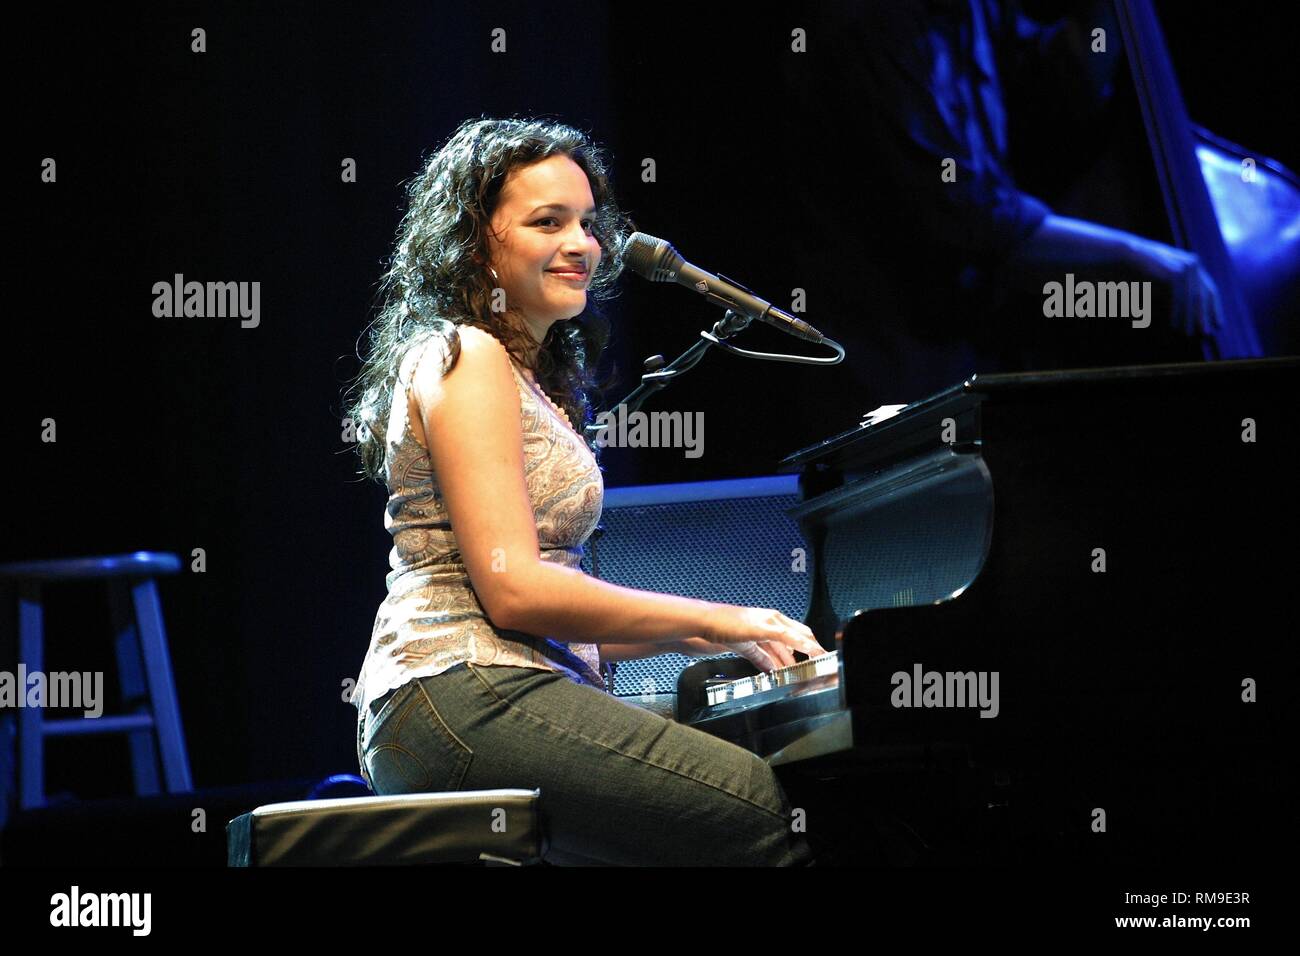 Singer, songwriter, pianist, keyboardist, guitarist, and occasional actress Norah Jones is shown performing on stage during a 'live' concert appearance. Stock Photo